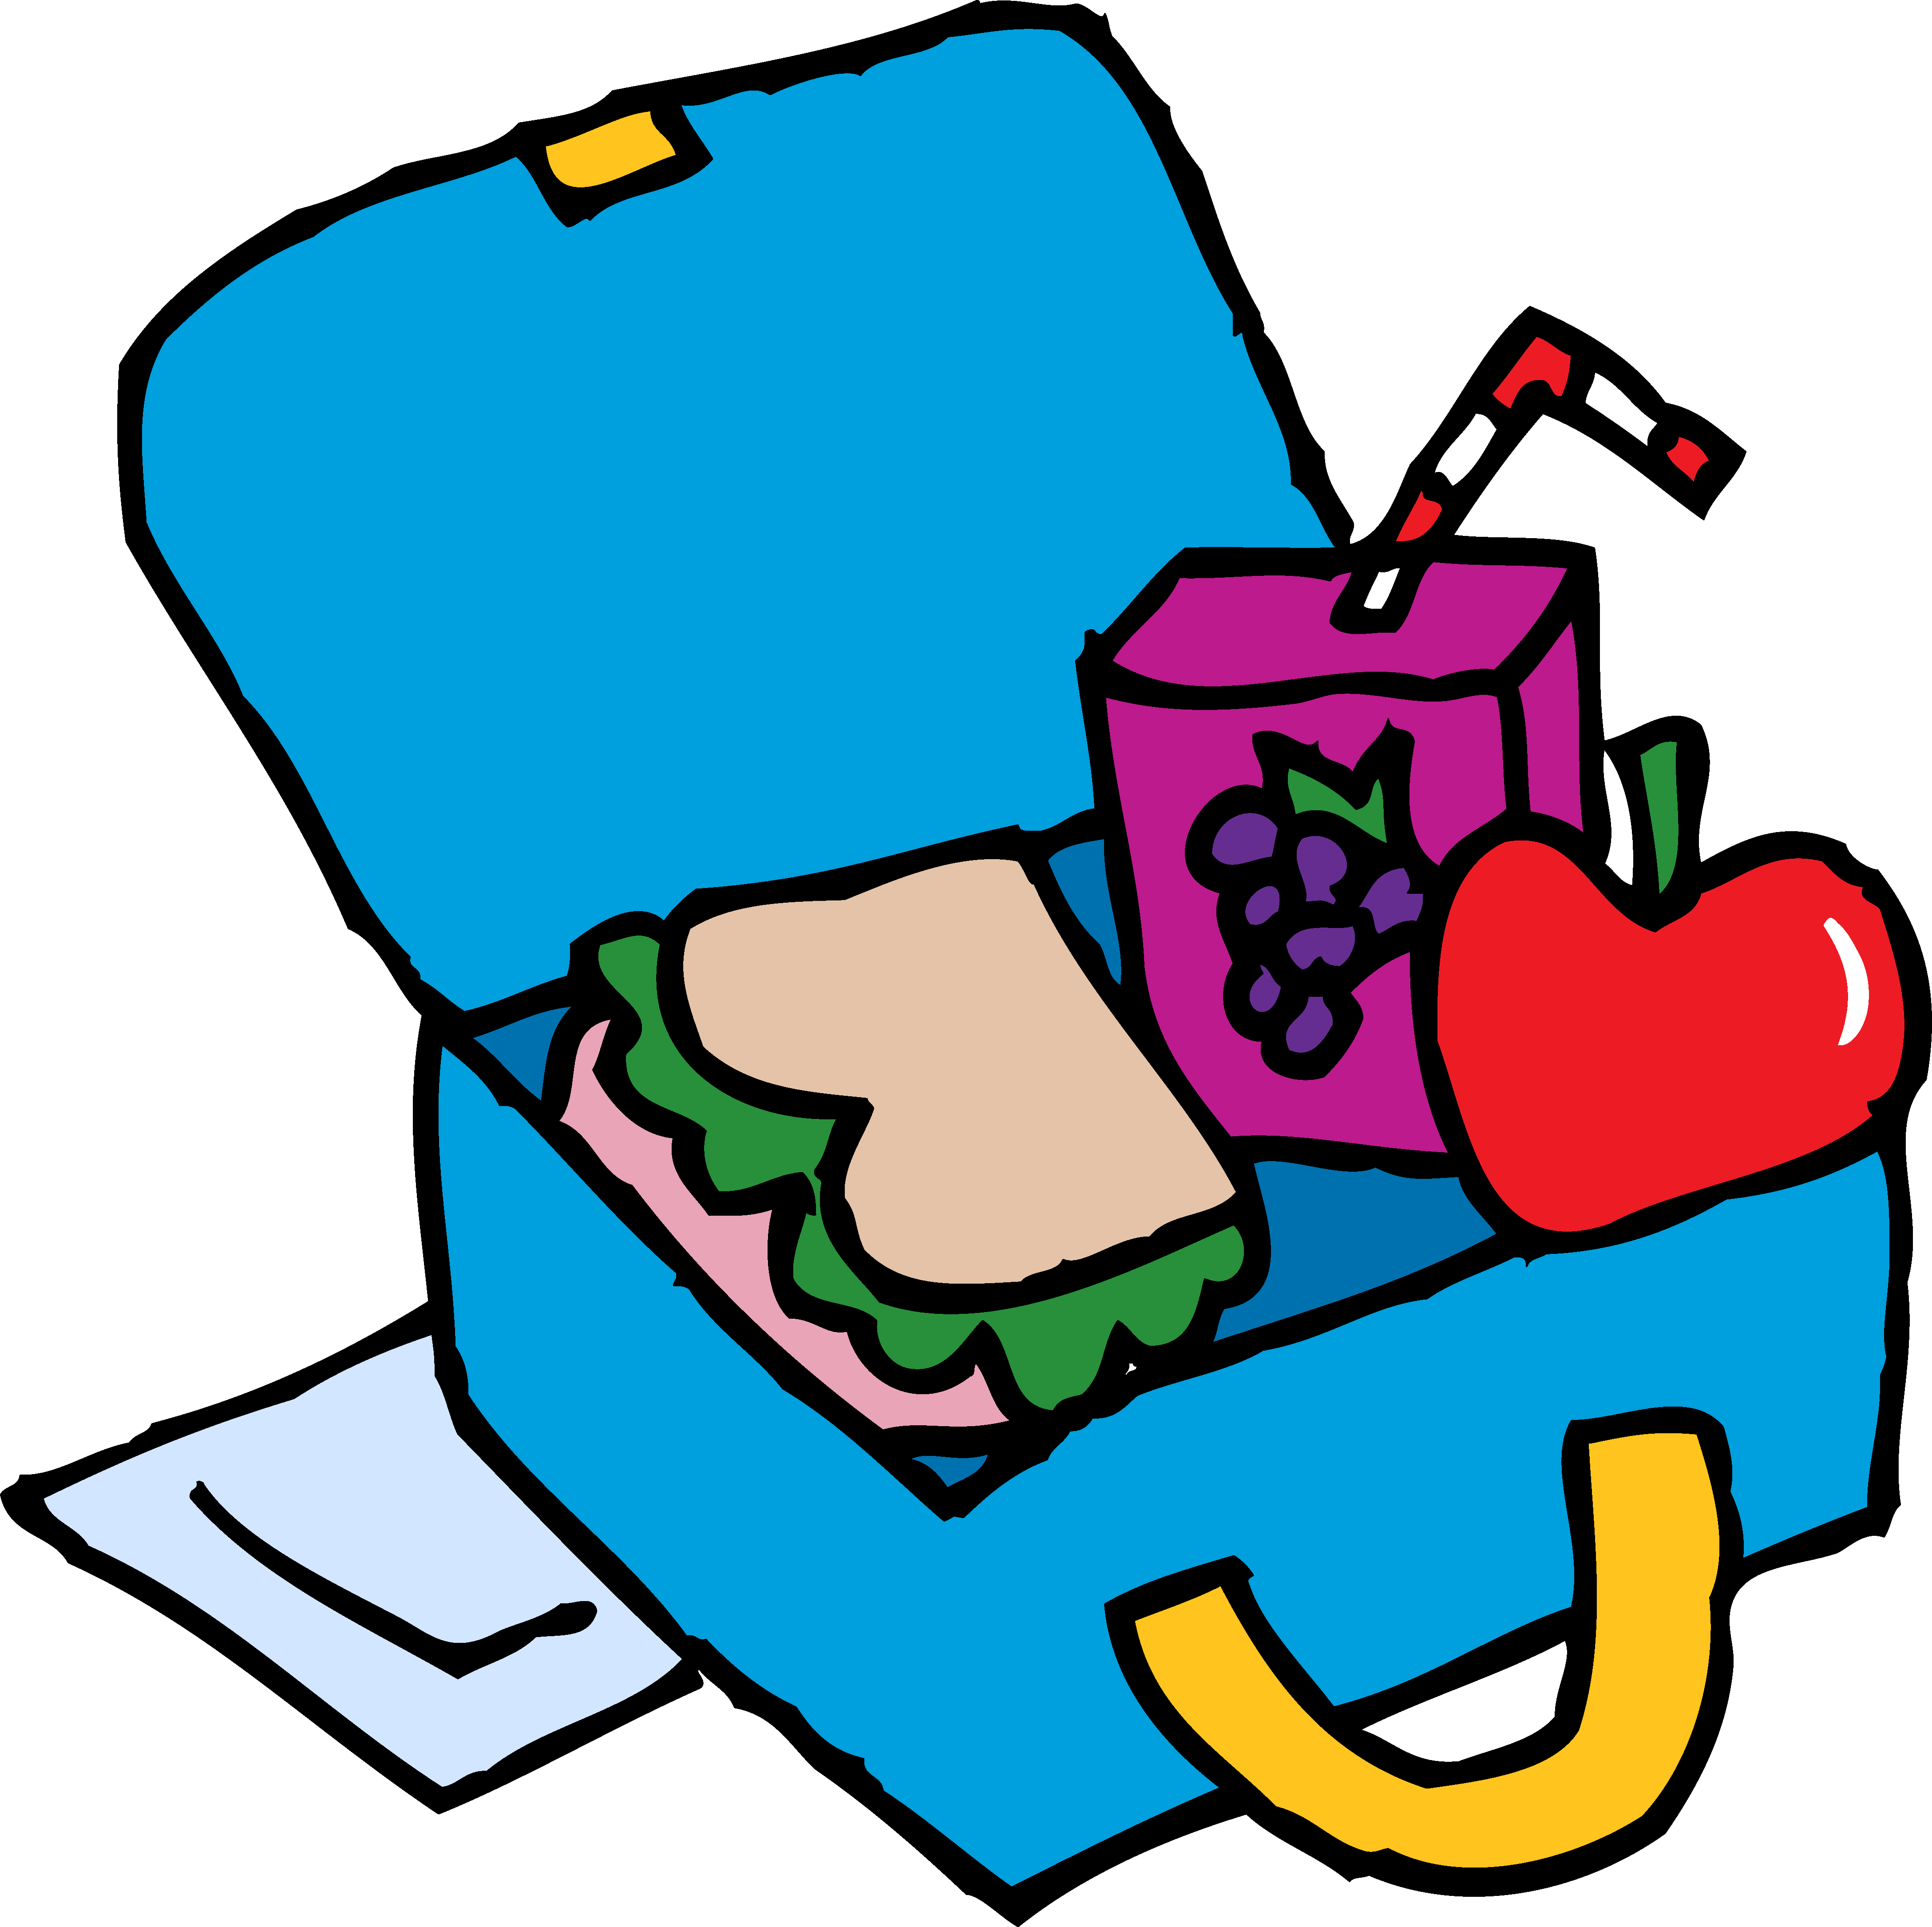 Lunch Box Clipart | Clipart Panda - Free Clipart Images